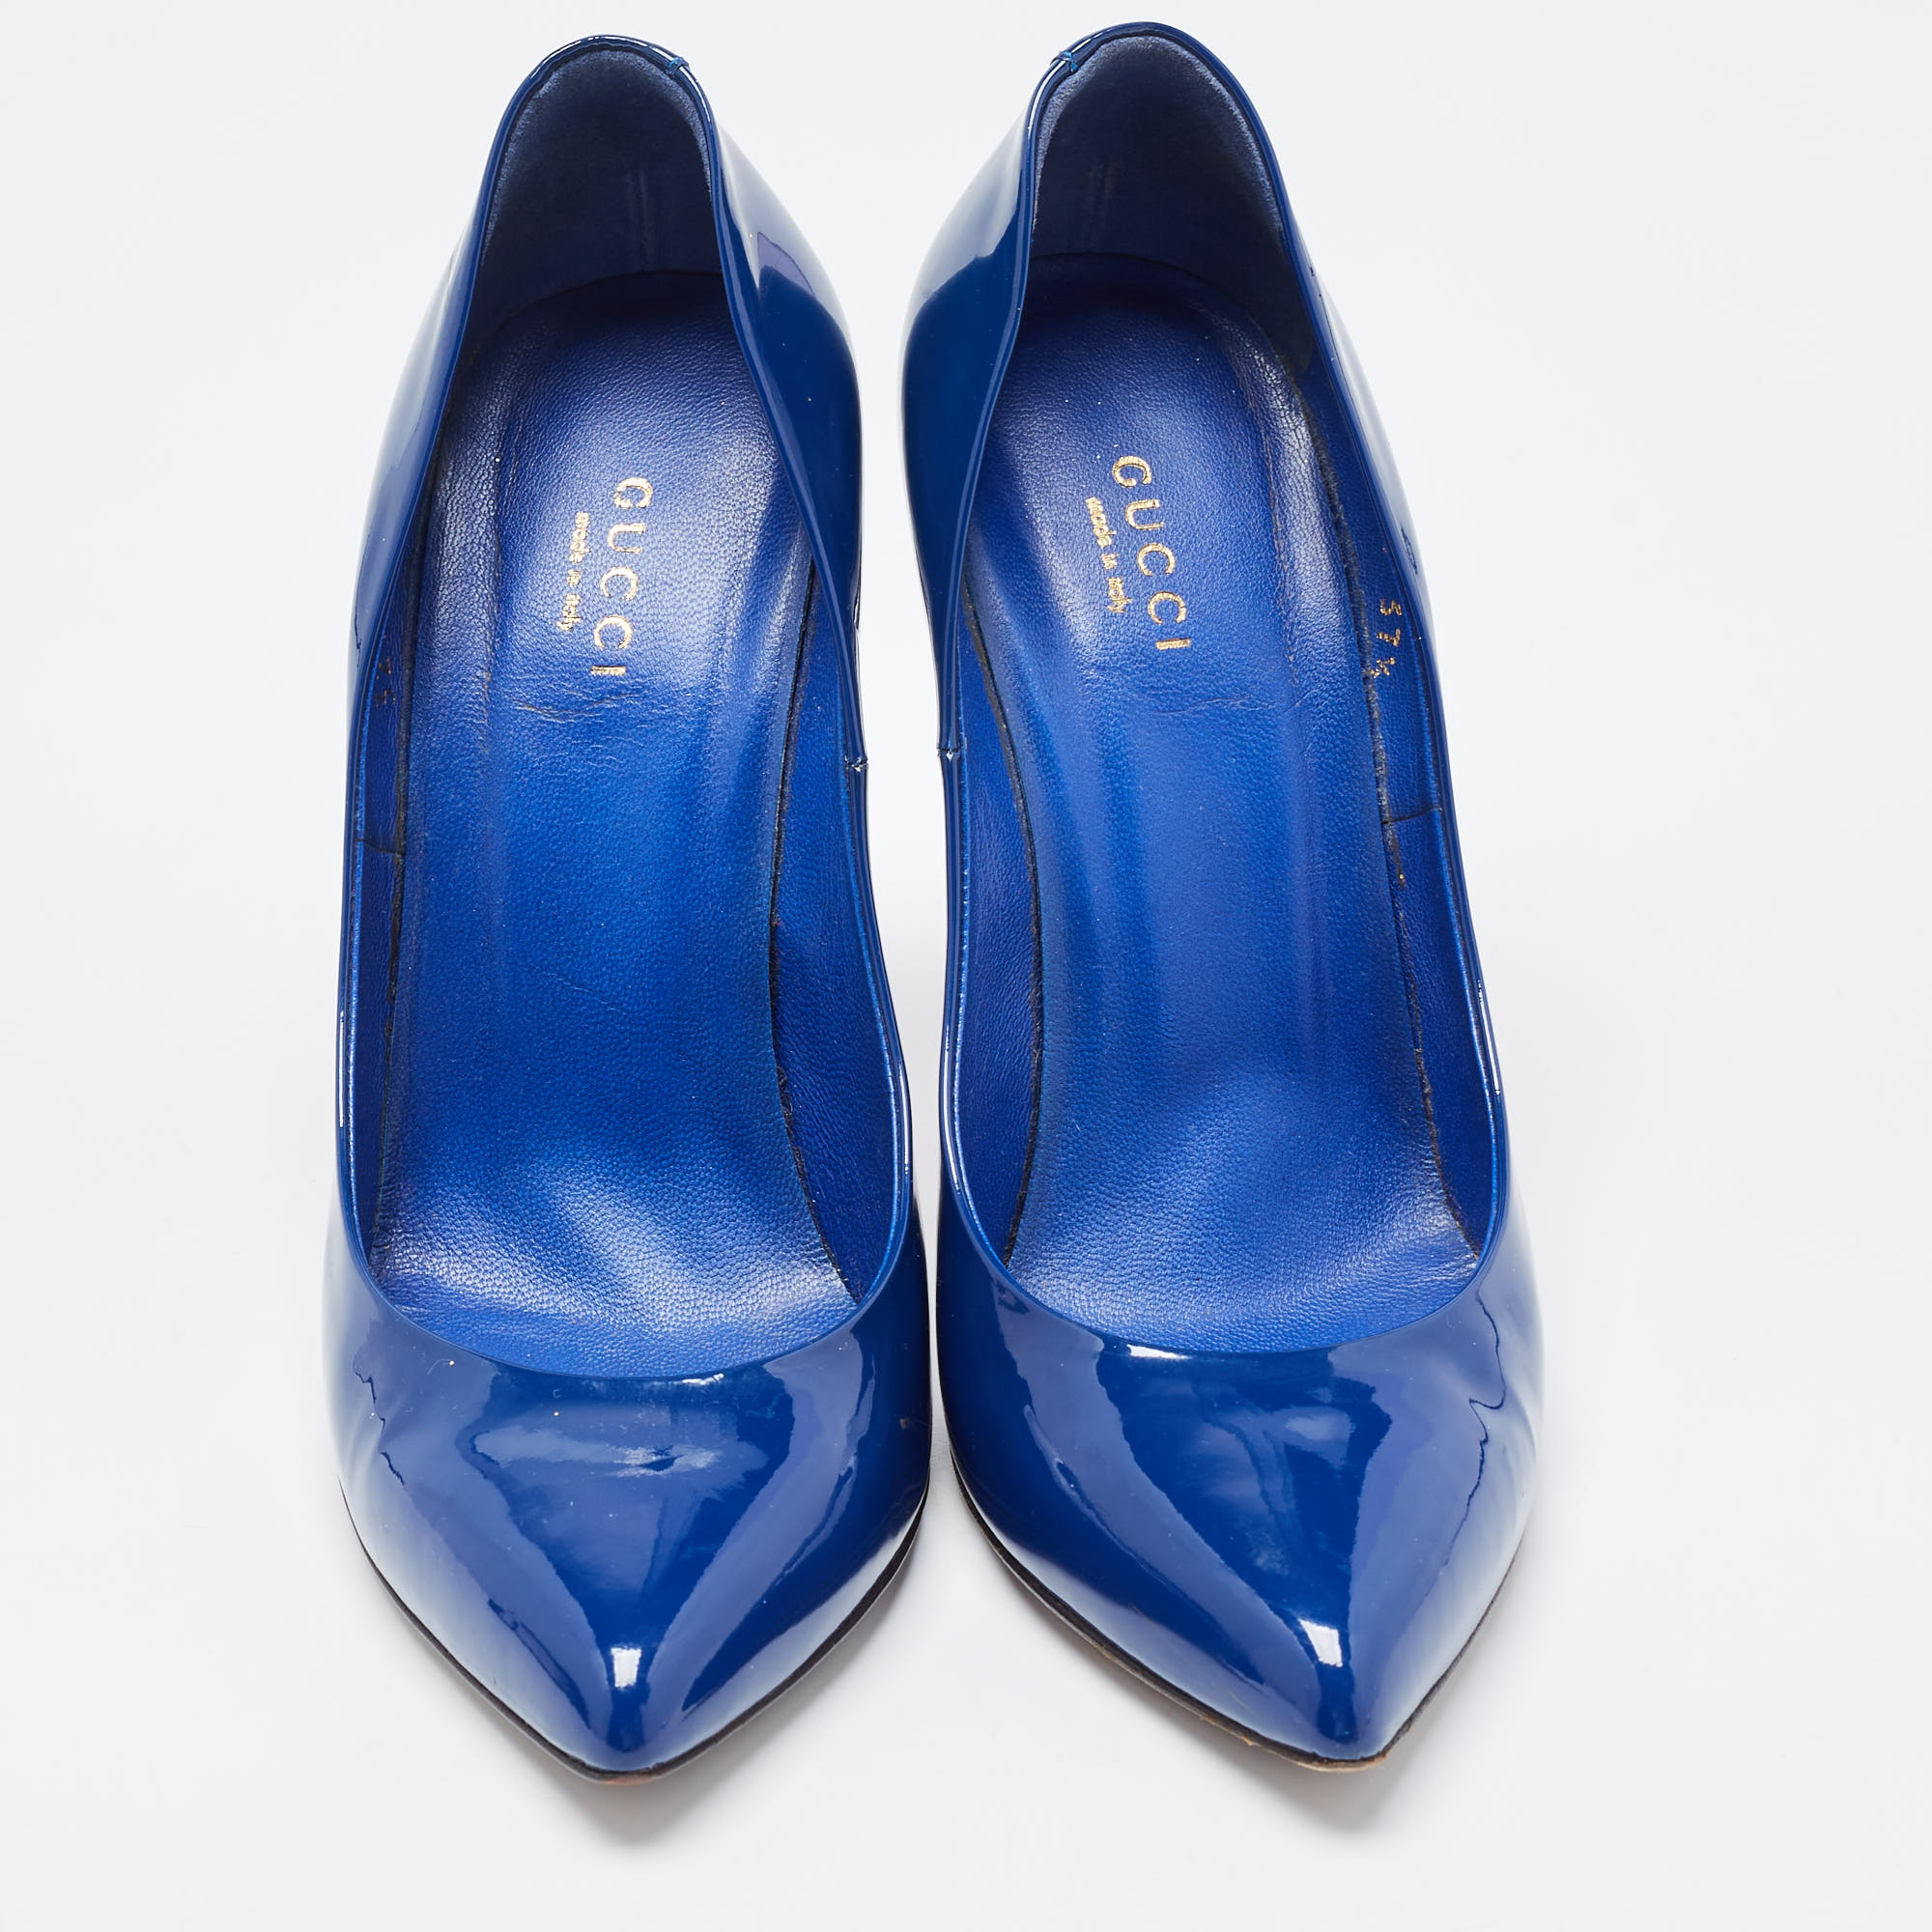 Gucci Royal Blue Patent Leather Pointed Toe Pumps Size 37.5